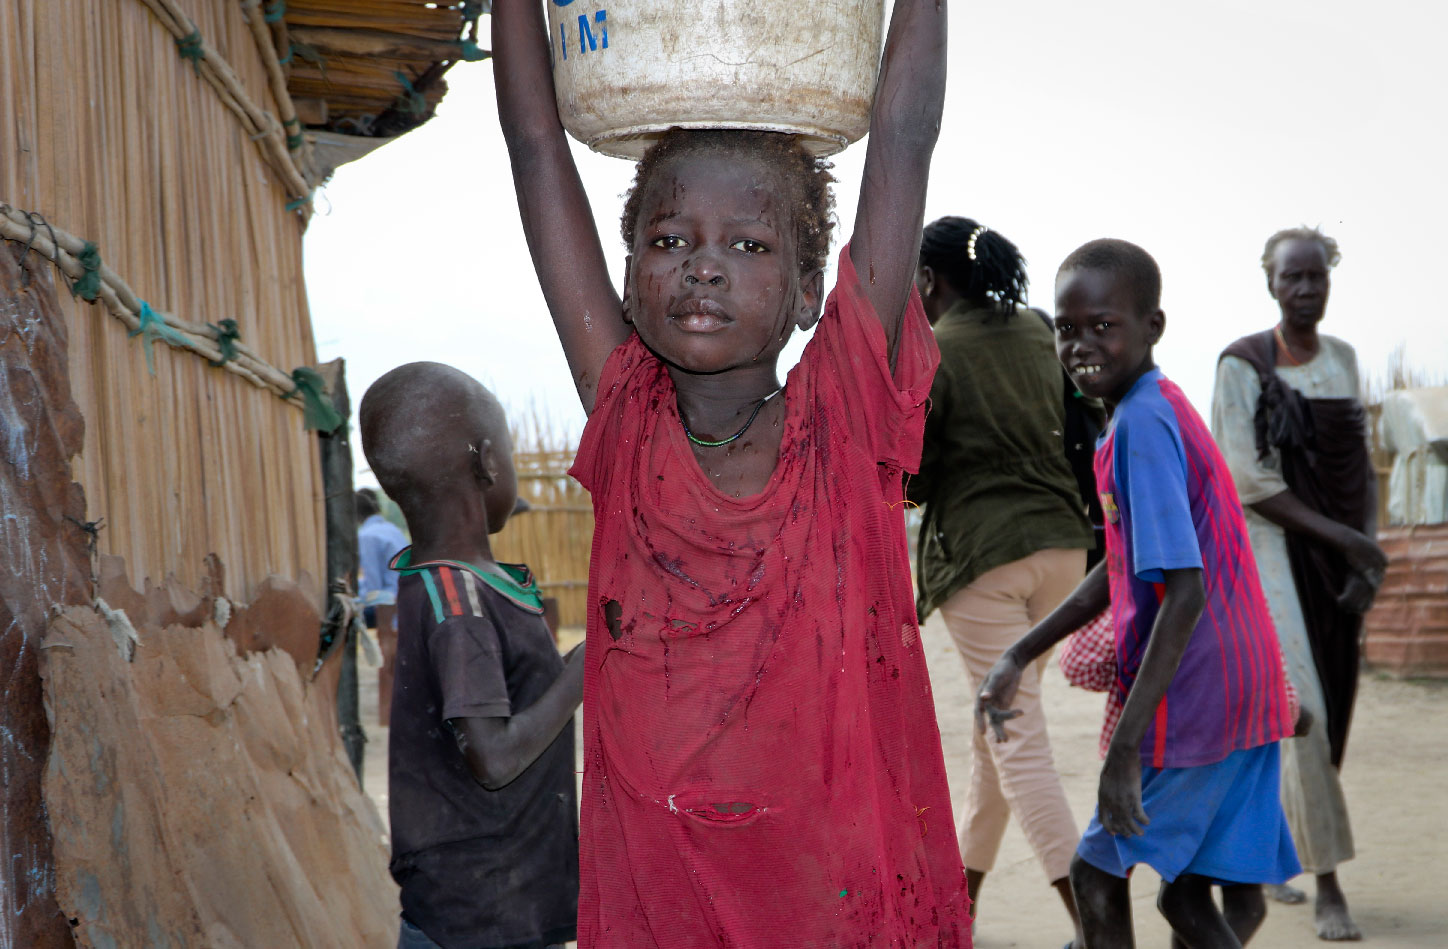 A young girl carries water on her head in Koythiey displaced person's camp on the outskirts of Bentiu town in South Sudan.